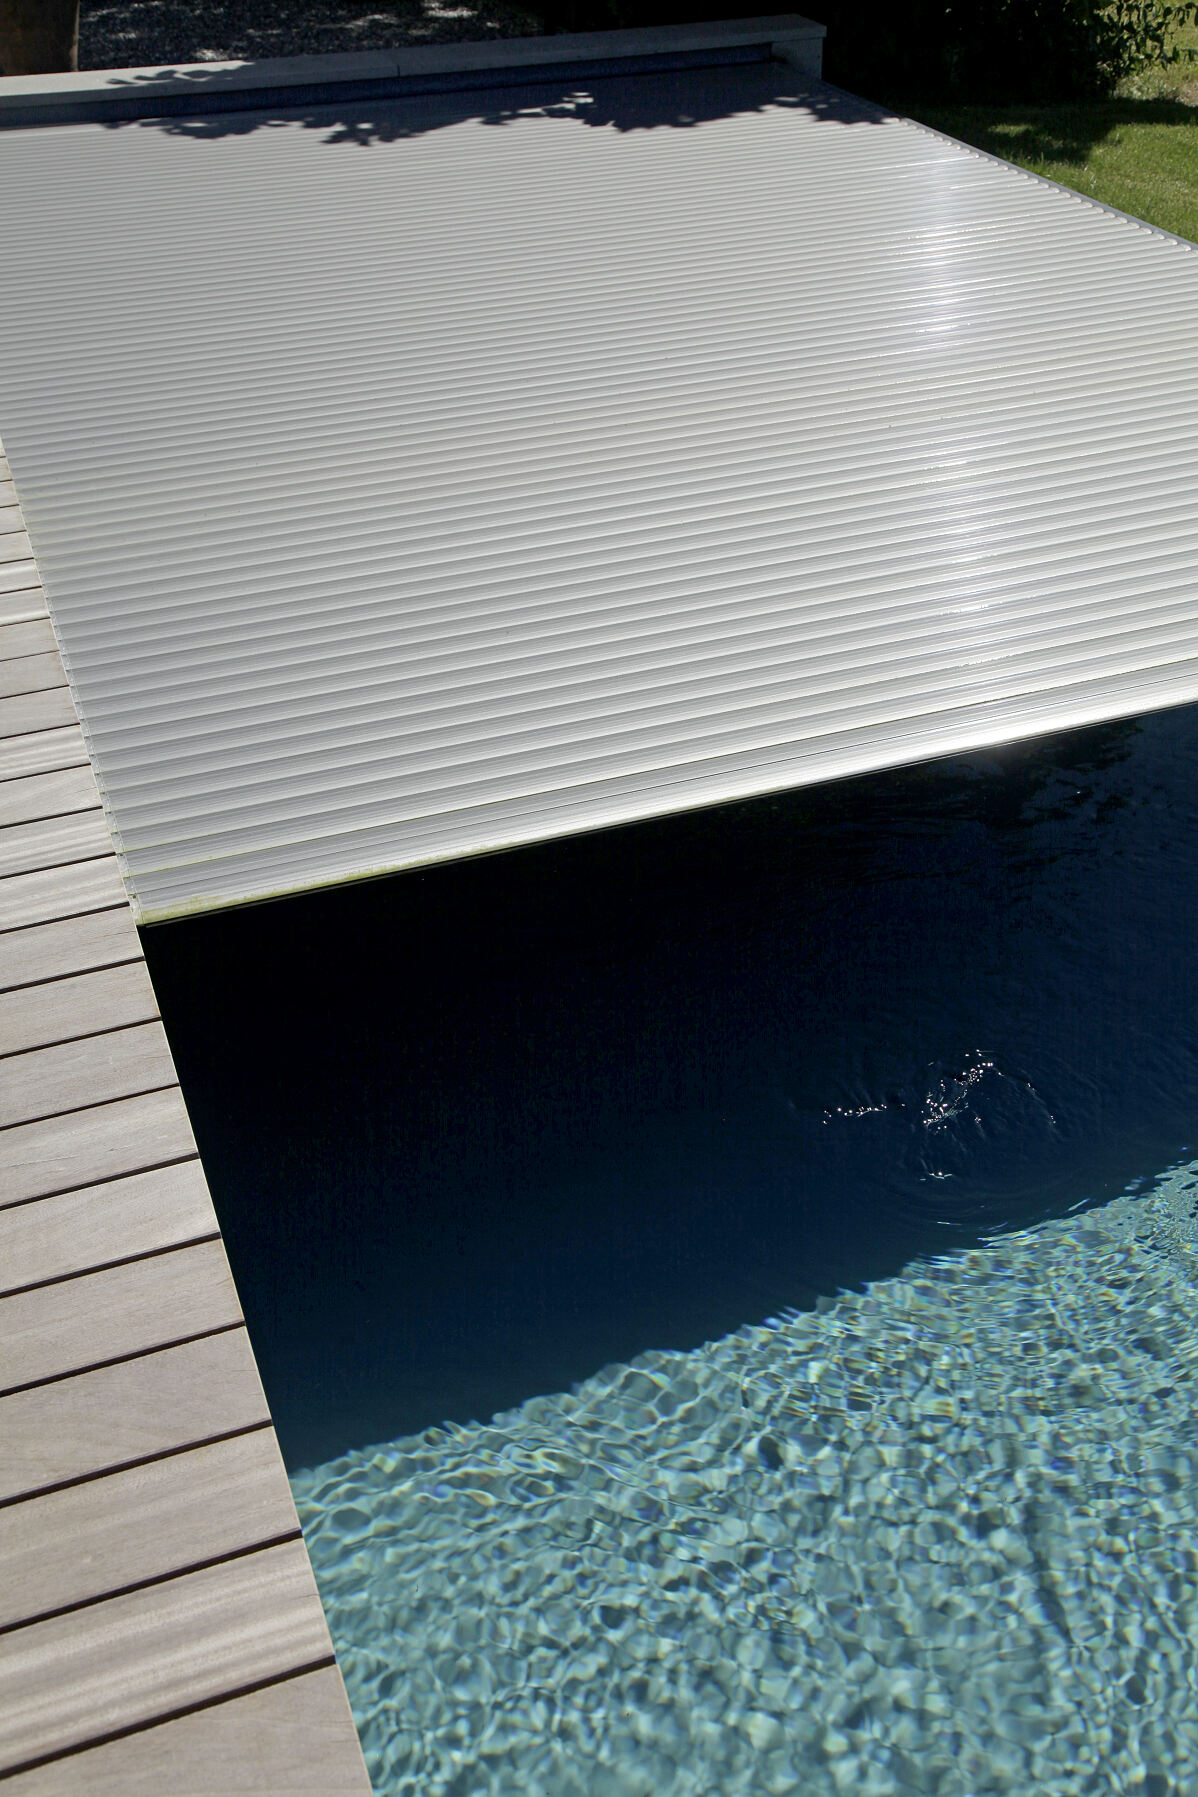 Poolcover